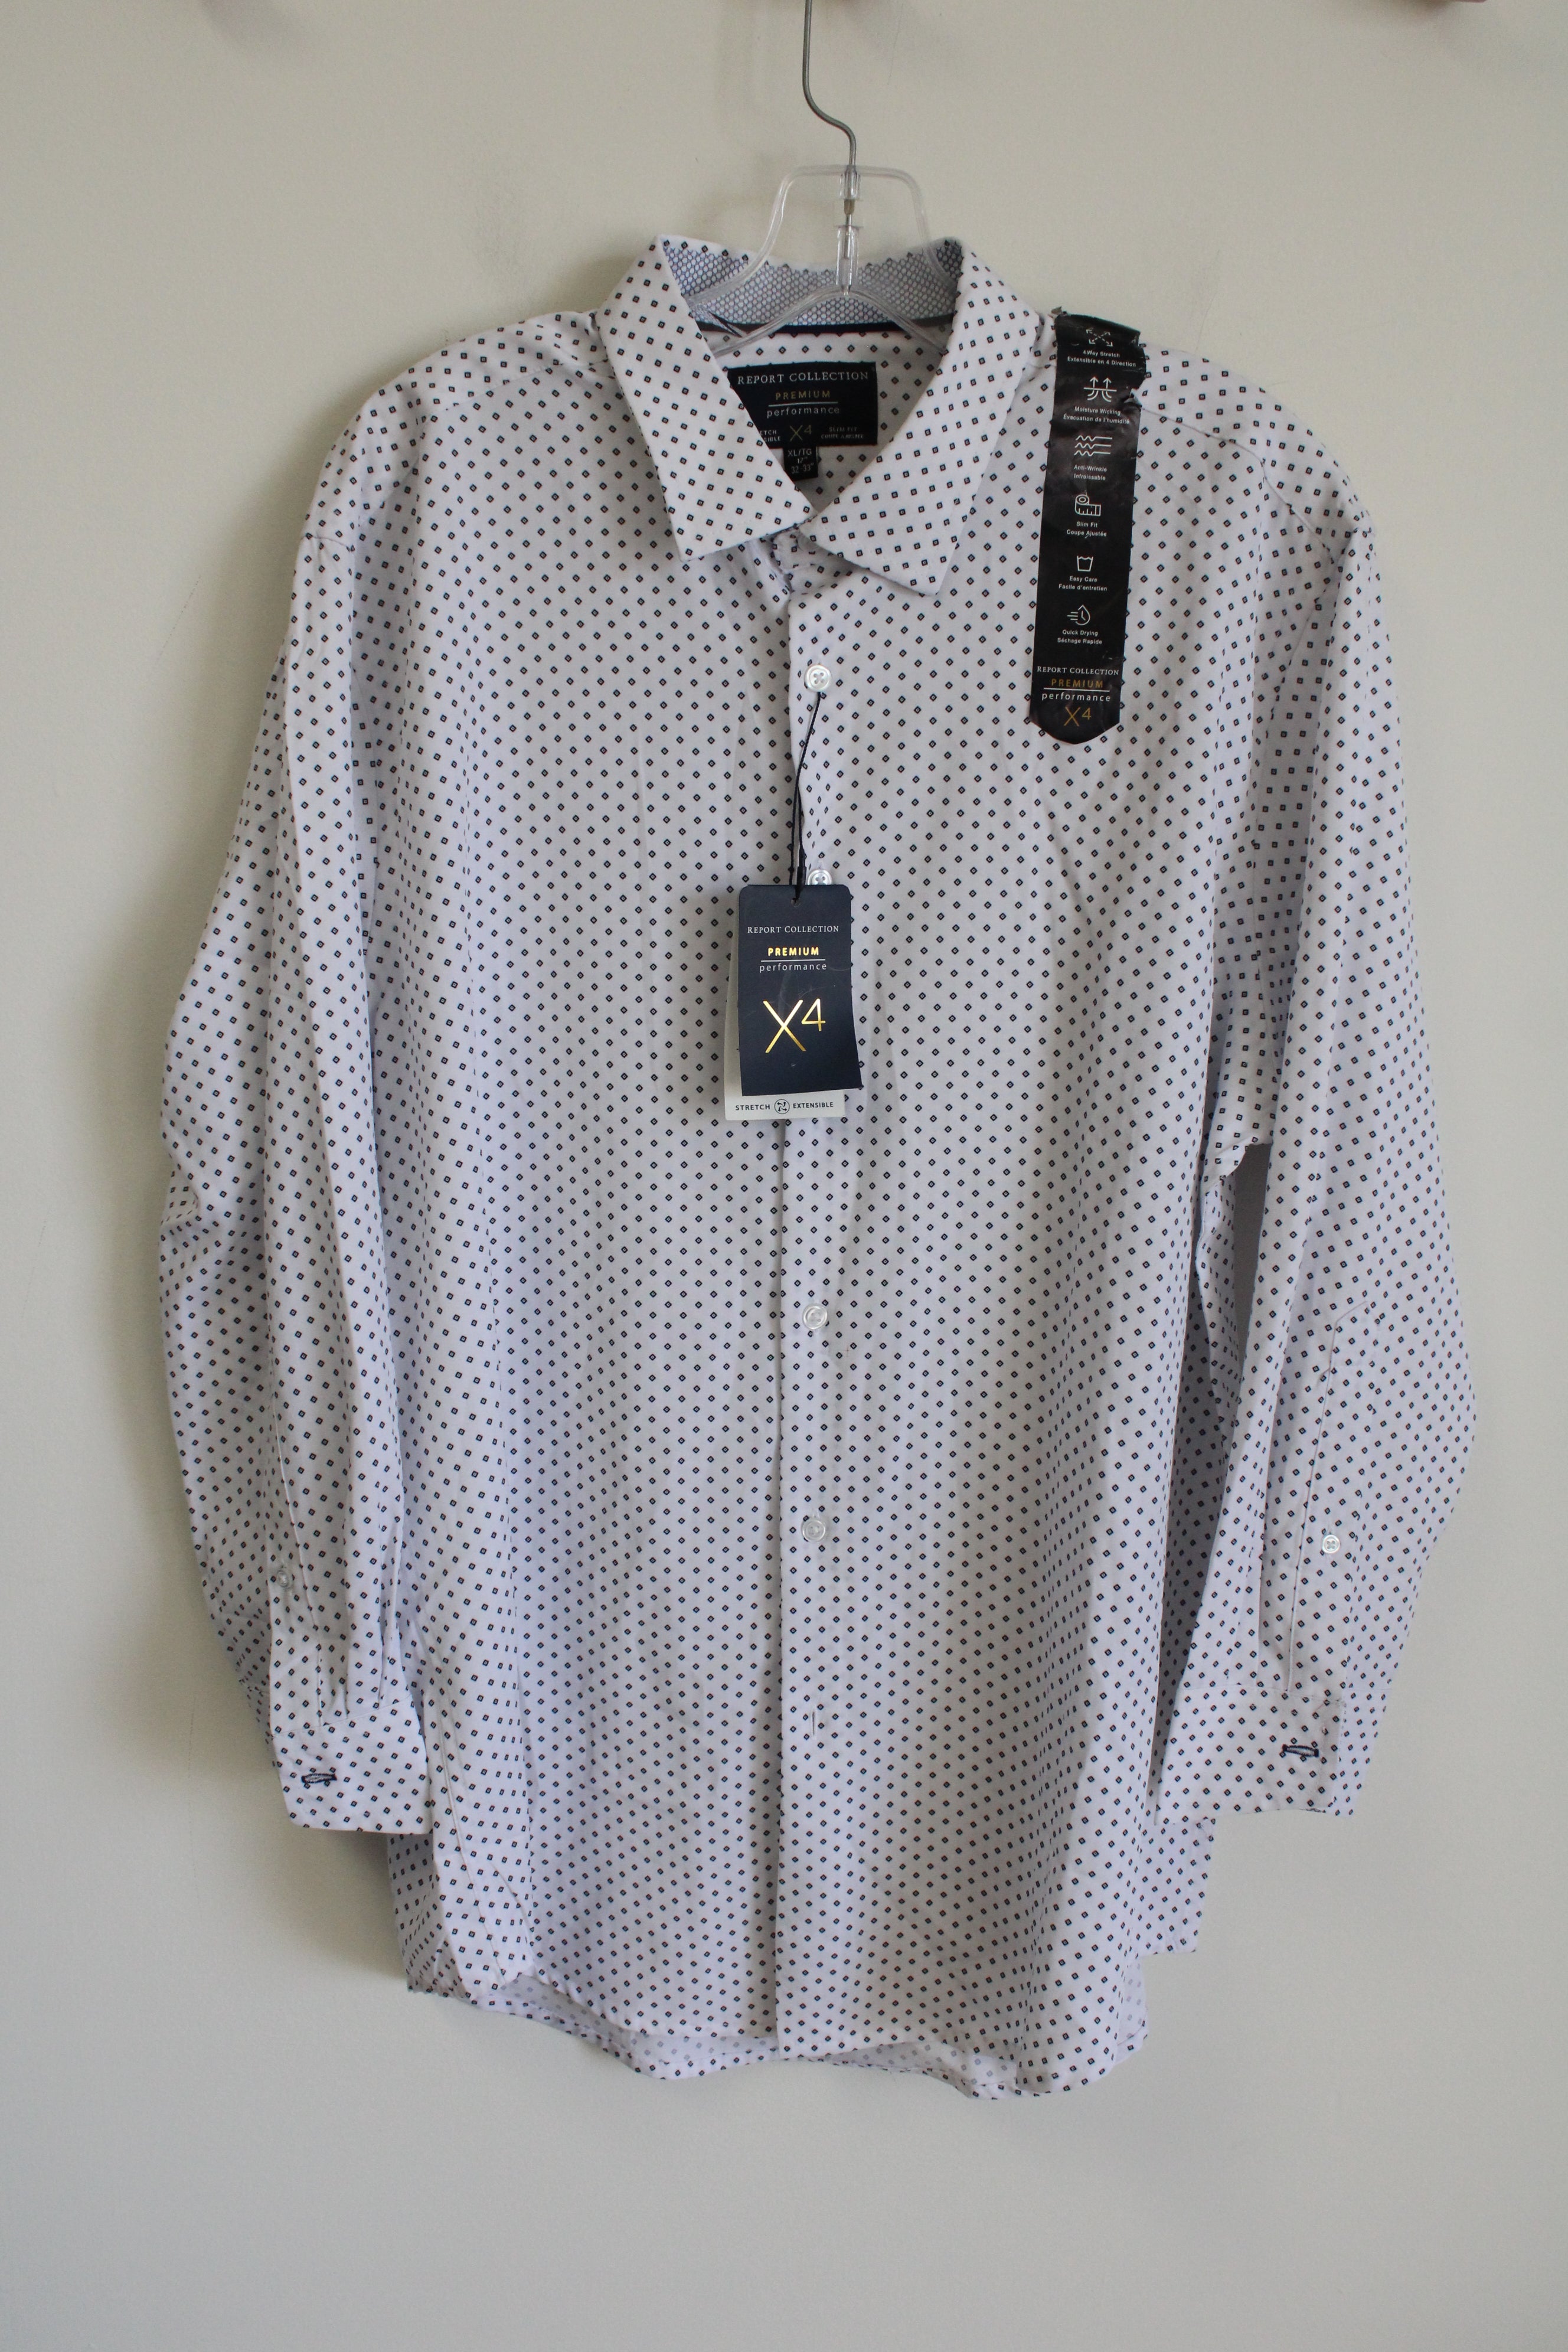 NEW Nordstrom Rack Report Collection Slim Fit White Patterned Button Down Shirt | XL